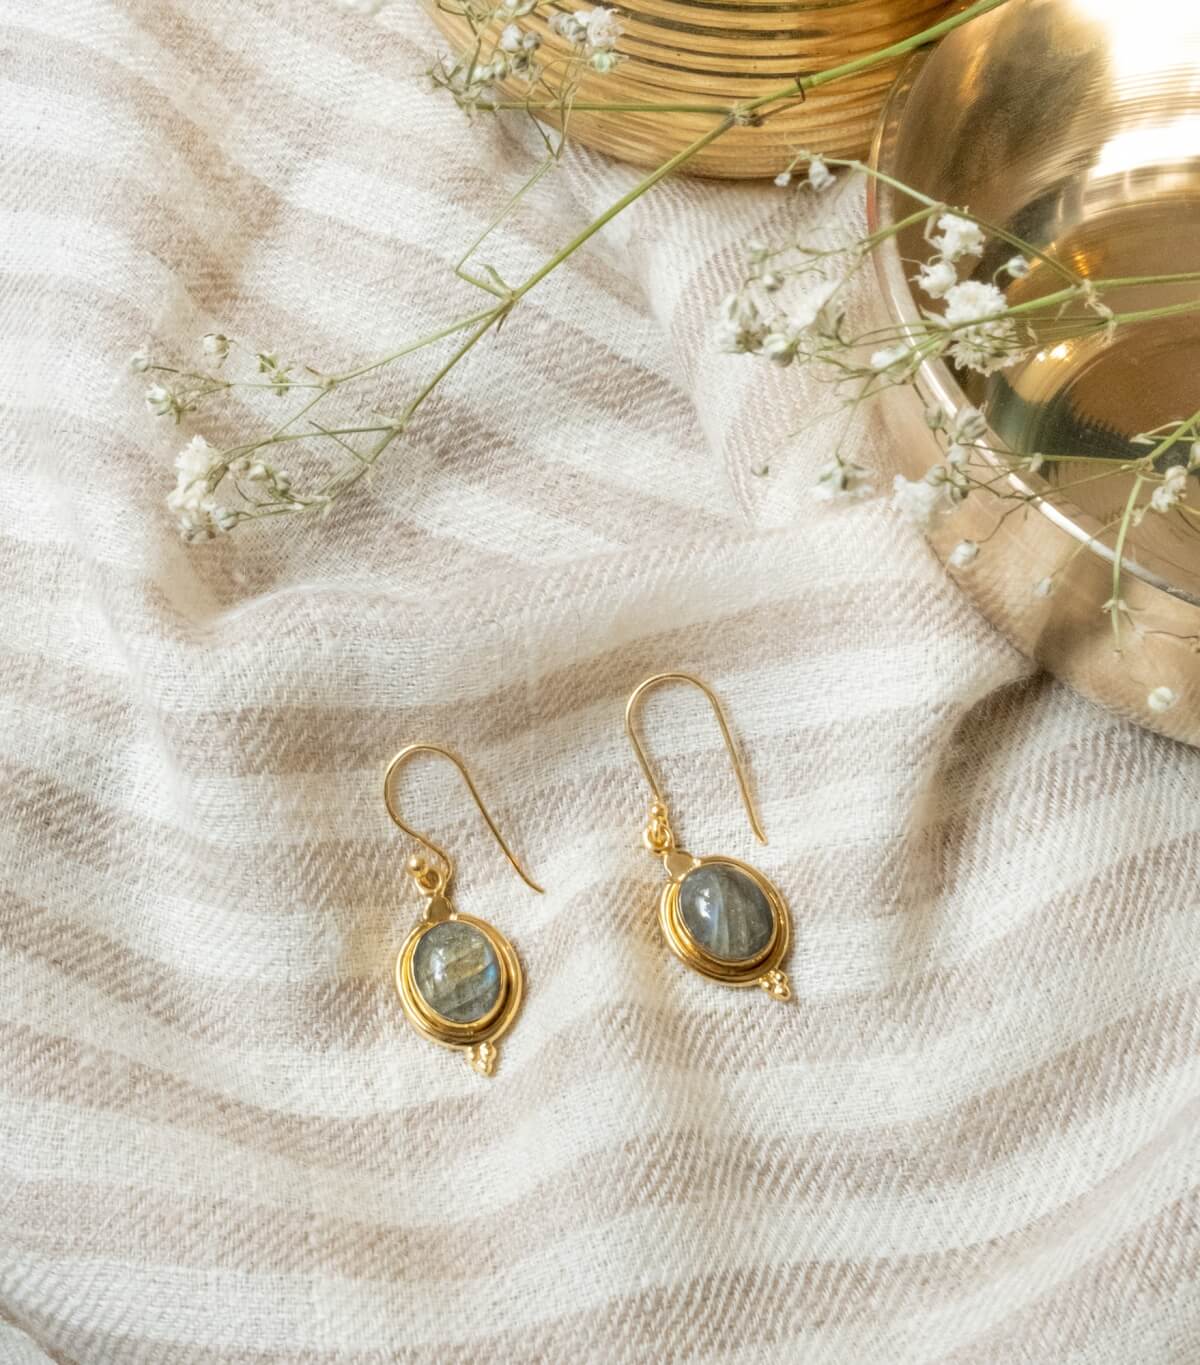 Indian earrings with labradorite